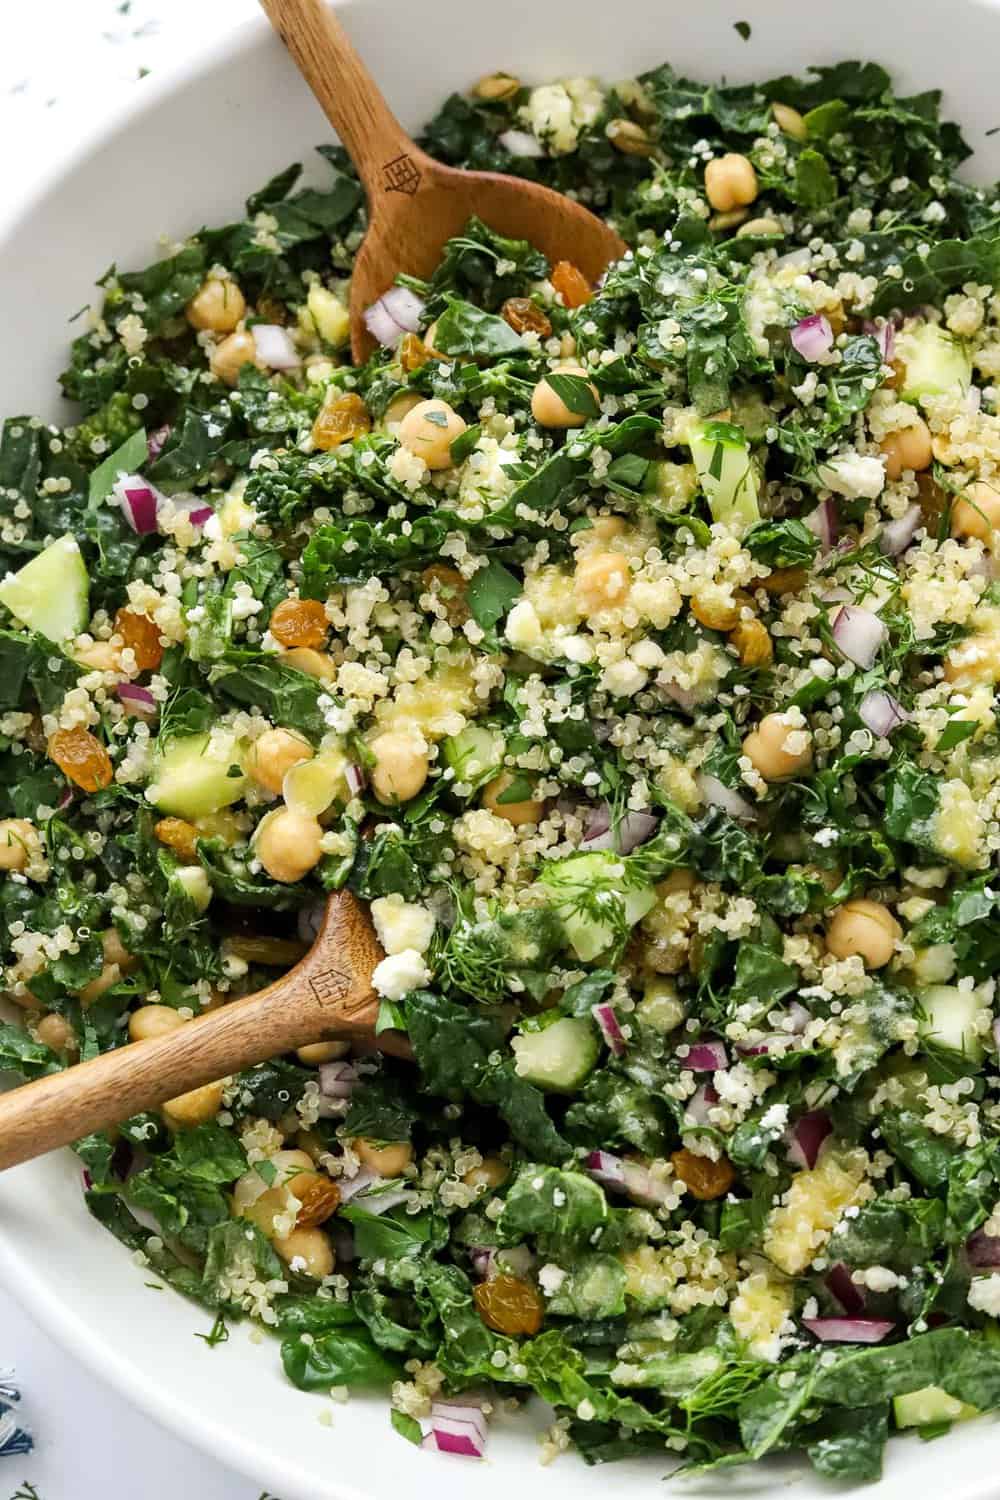 Sliced kale, chickpeas red onion, cucumber and lemon dressing in a serving bowl with wooden salad spoons in the bowl.